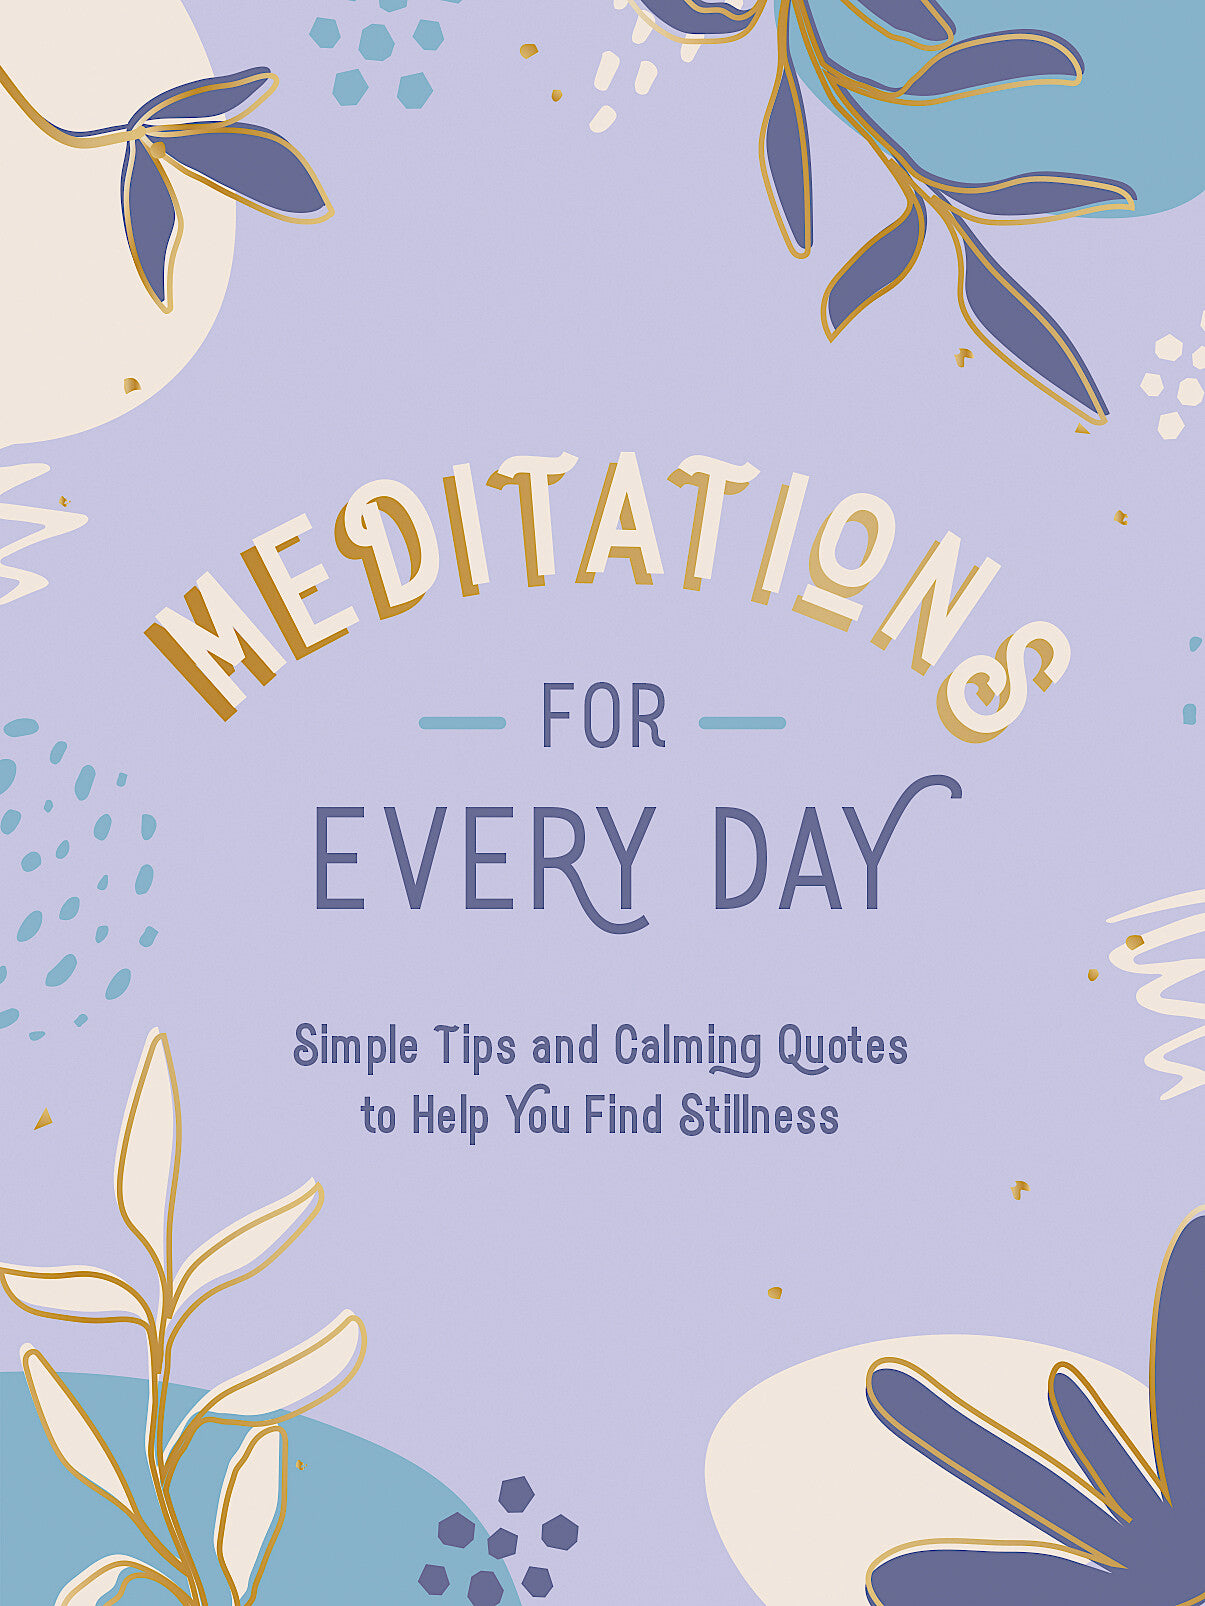 Meditations for Every Day